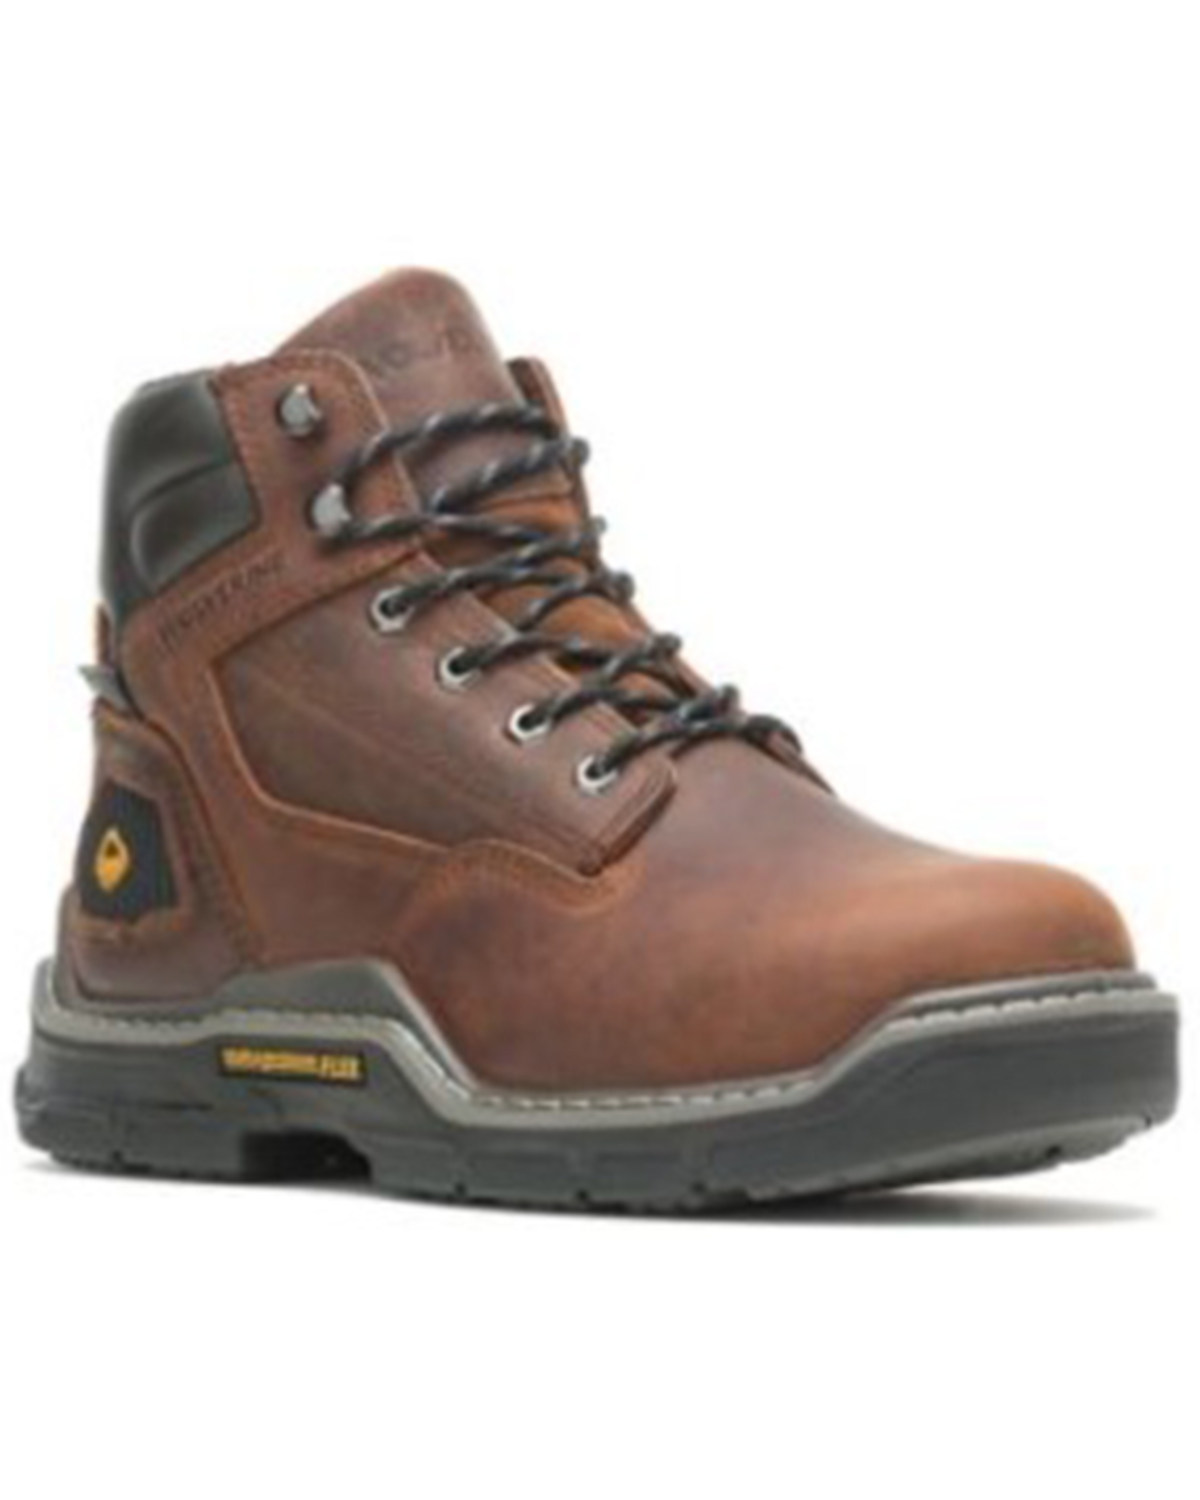 Wolverine Men's Raider DuraShock Insulated Lace-Up Work Boots - Carbon Toe